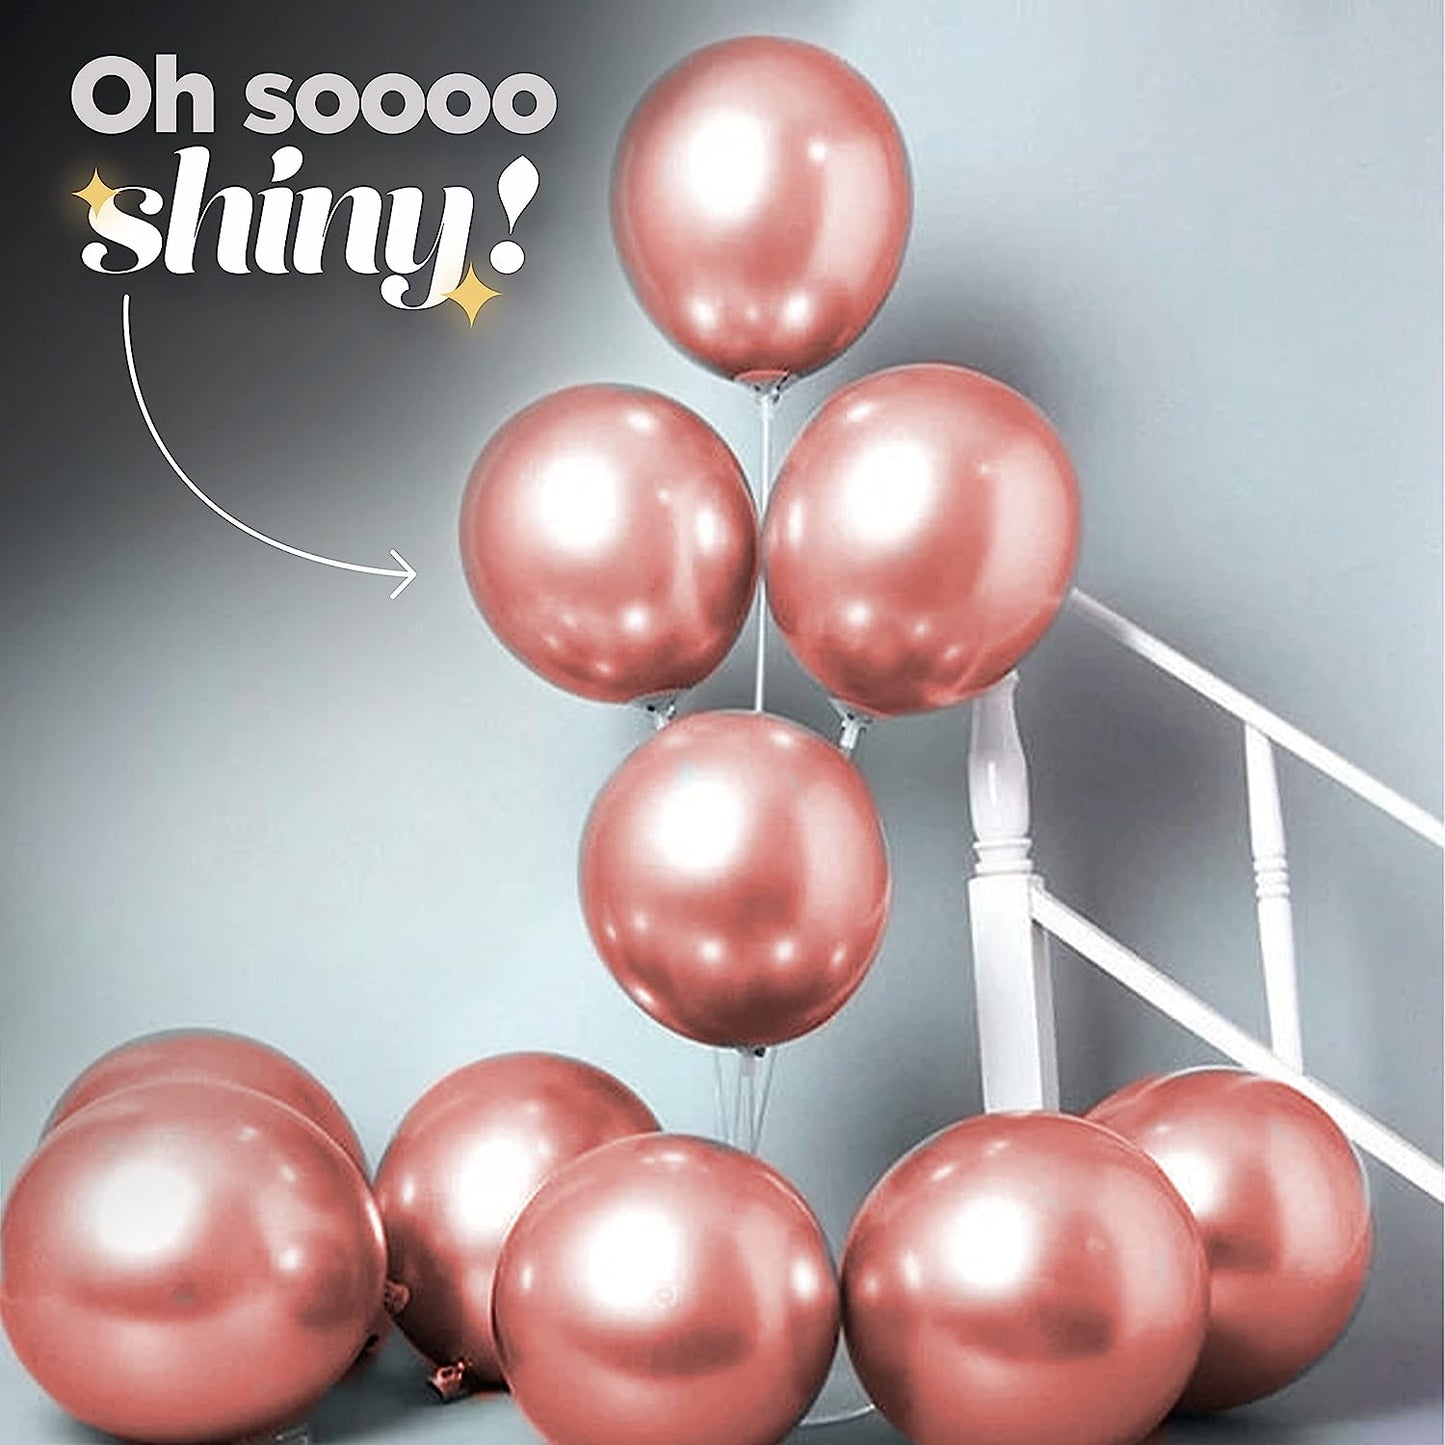 Rose Gold Chrome Metallic 12 Inches Pack of 10 Balloons with Shiny Surface For Birthdays/Anniversary/Engagement/Baby Shower/bachelorette Party Decorations